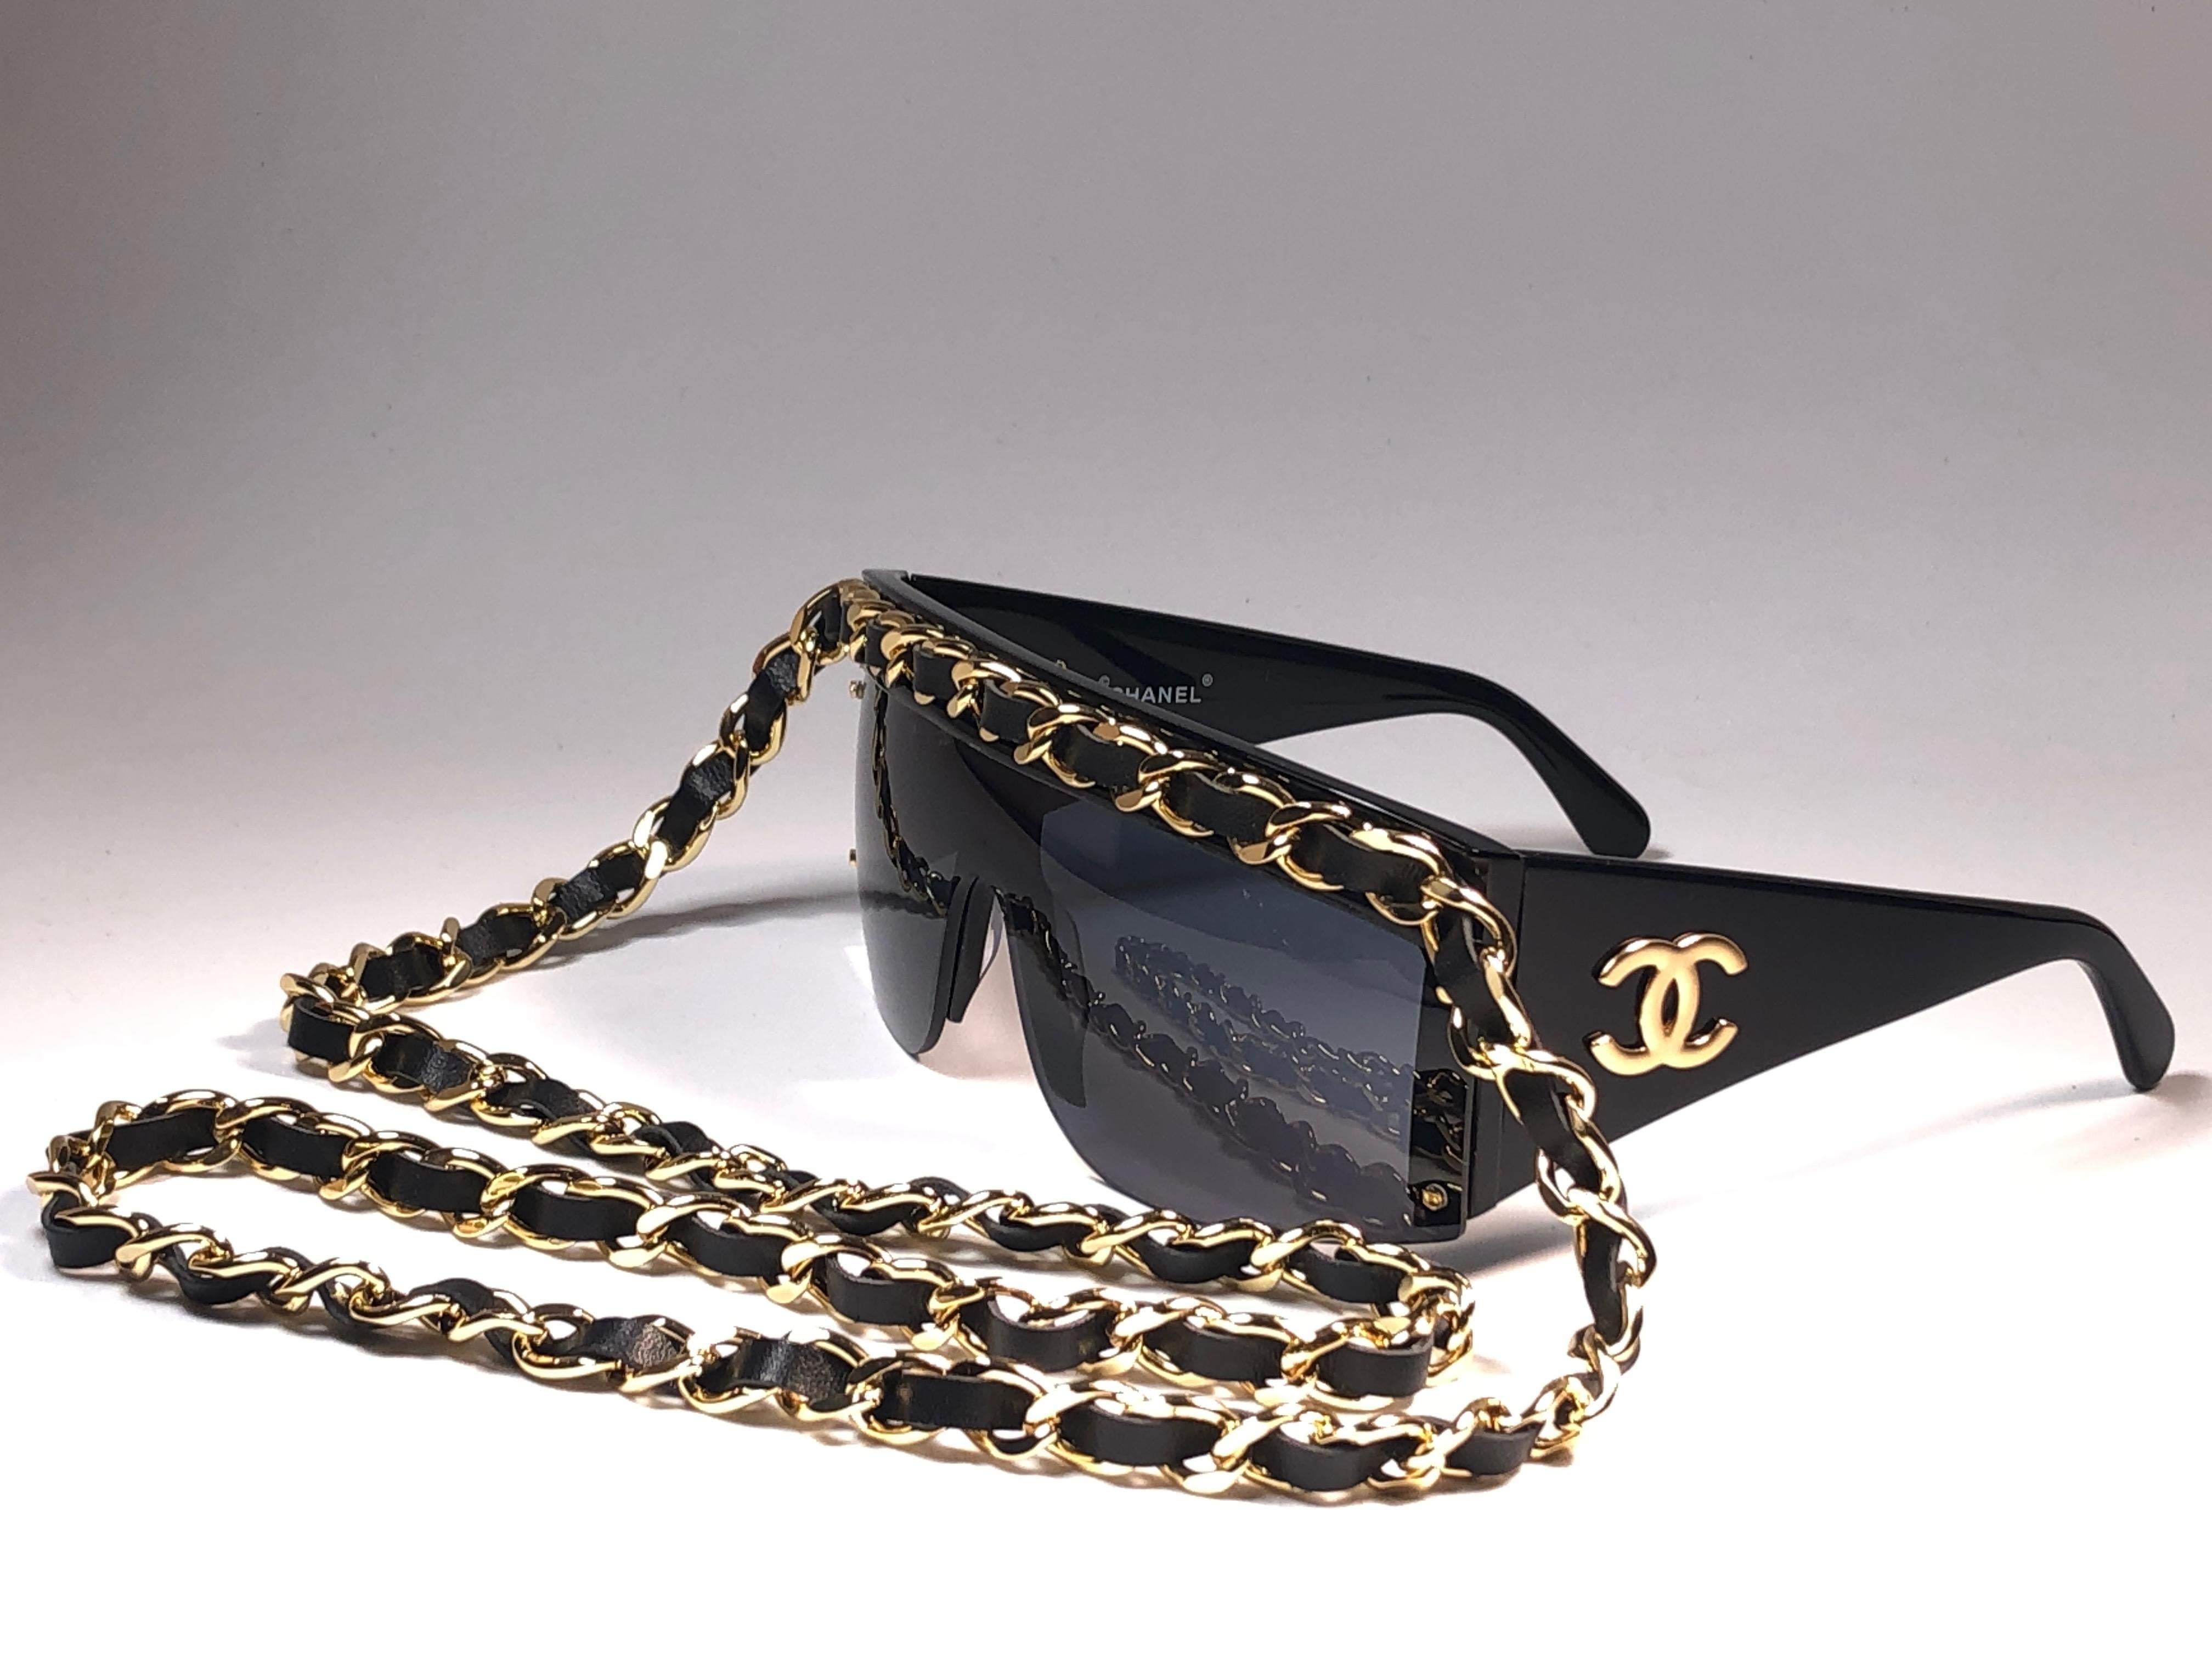 New Rare Vintage Chanel gold hardware sunglasses for the Fall Winter collection 1992.

A seldom and unique piece in this new, never displayed or worn condition. This item could have minor sign of wear due got storage.

This pair of Chanel sunglasses